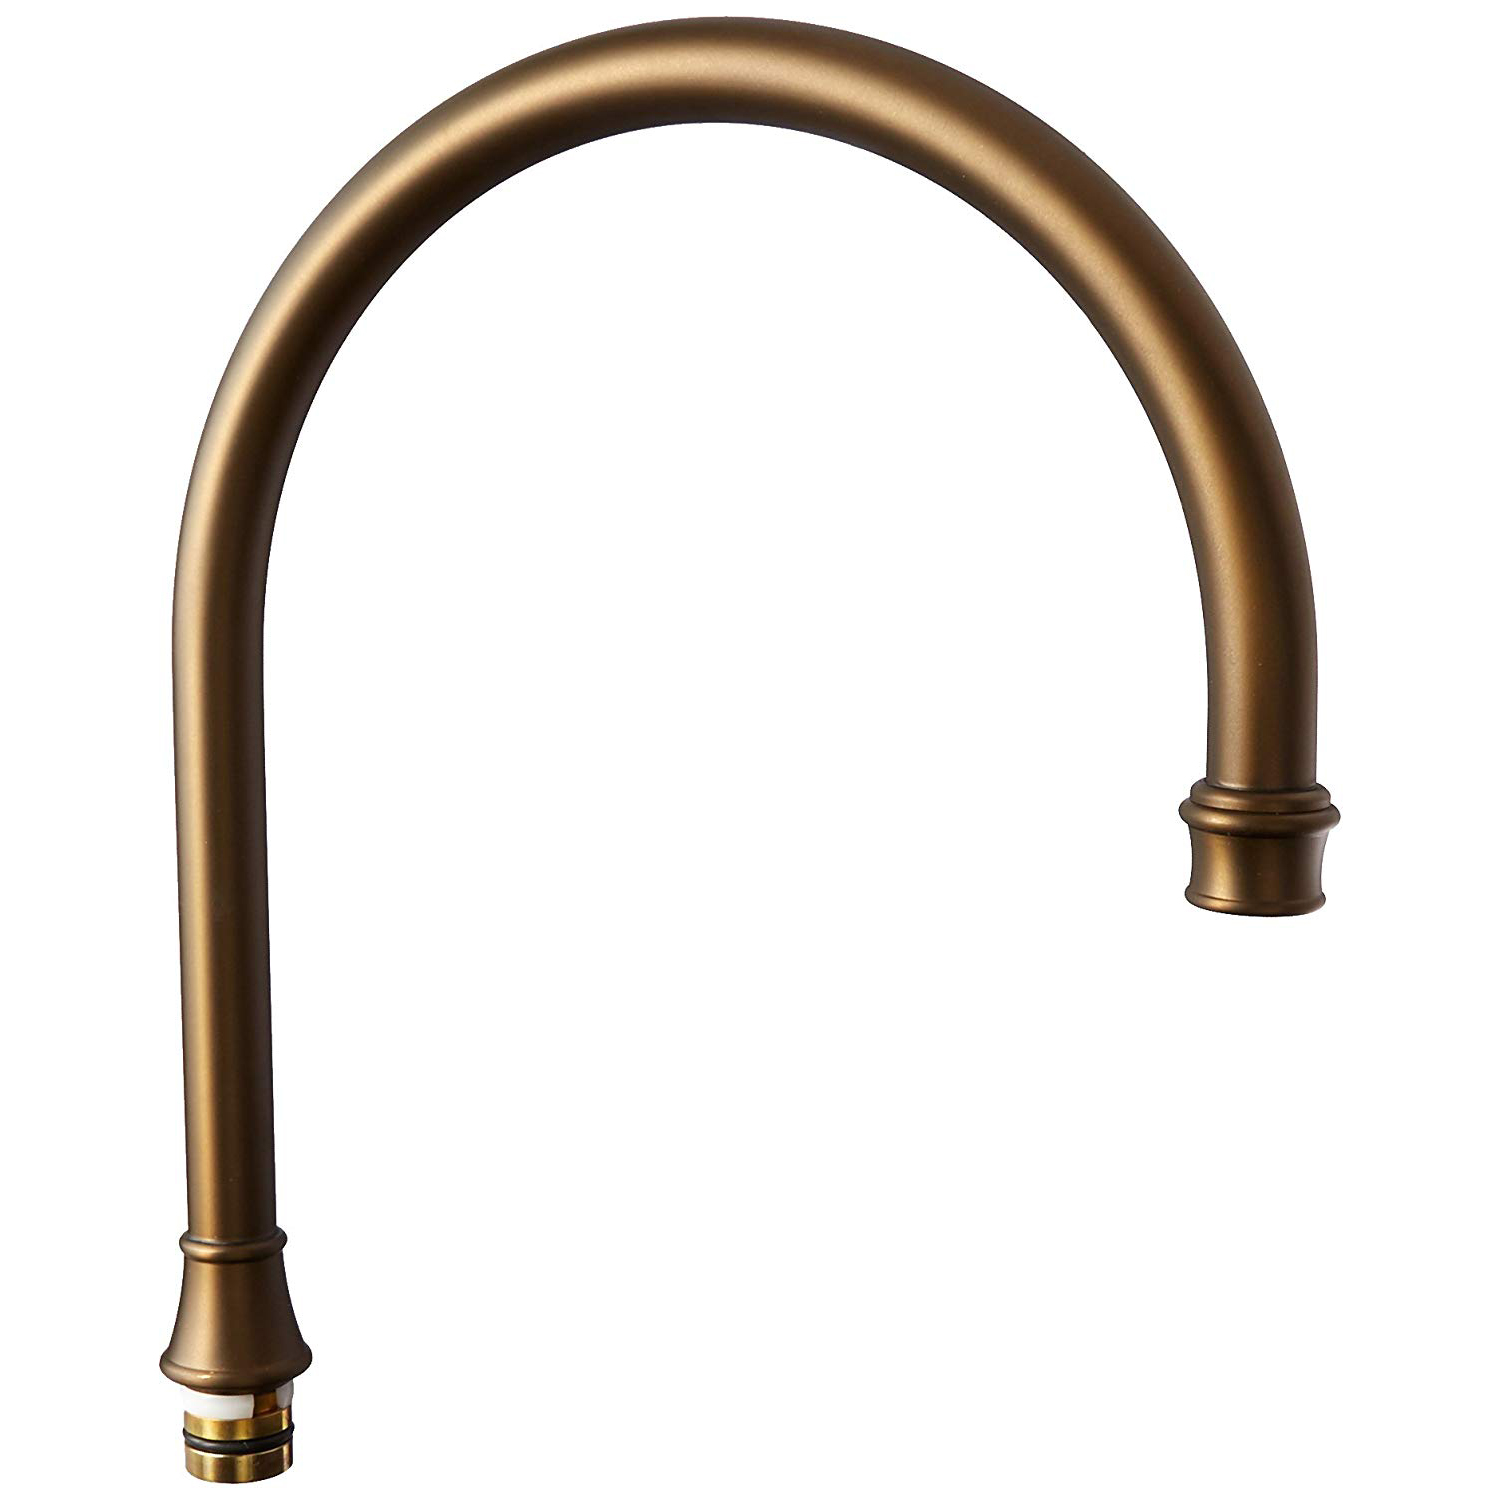 C-Spout for Kitchen Faucets in English Brass